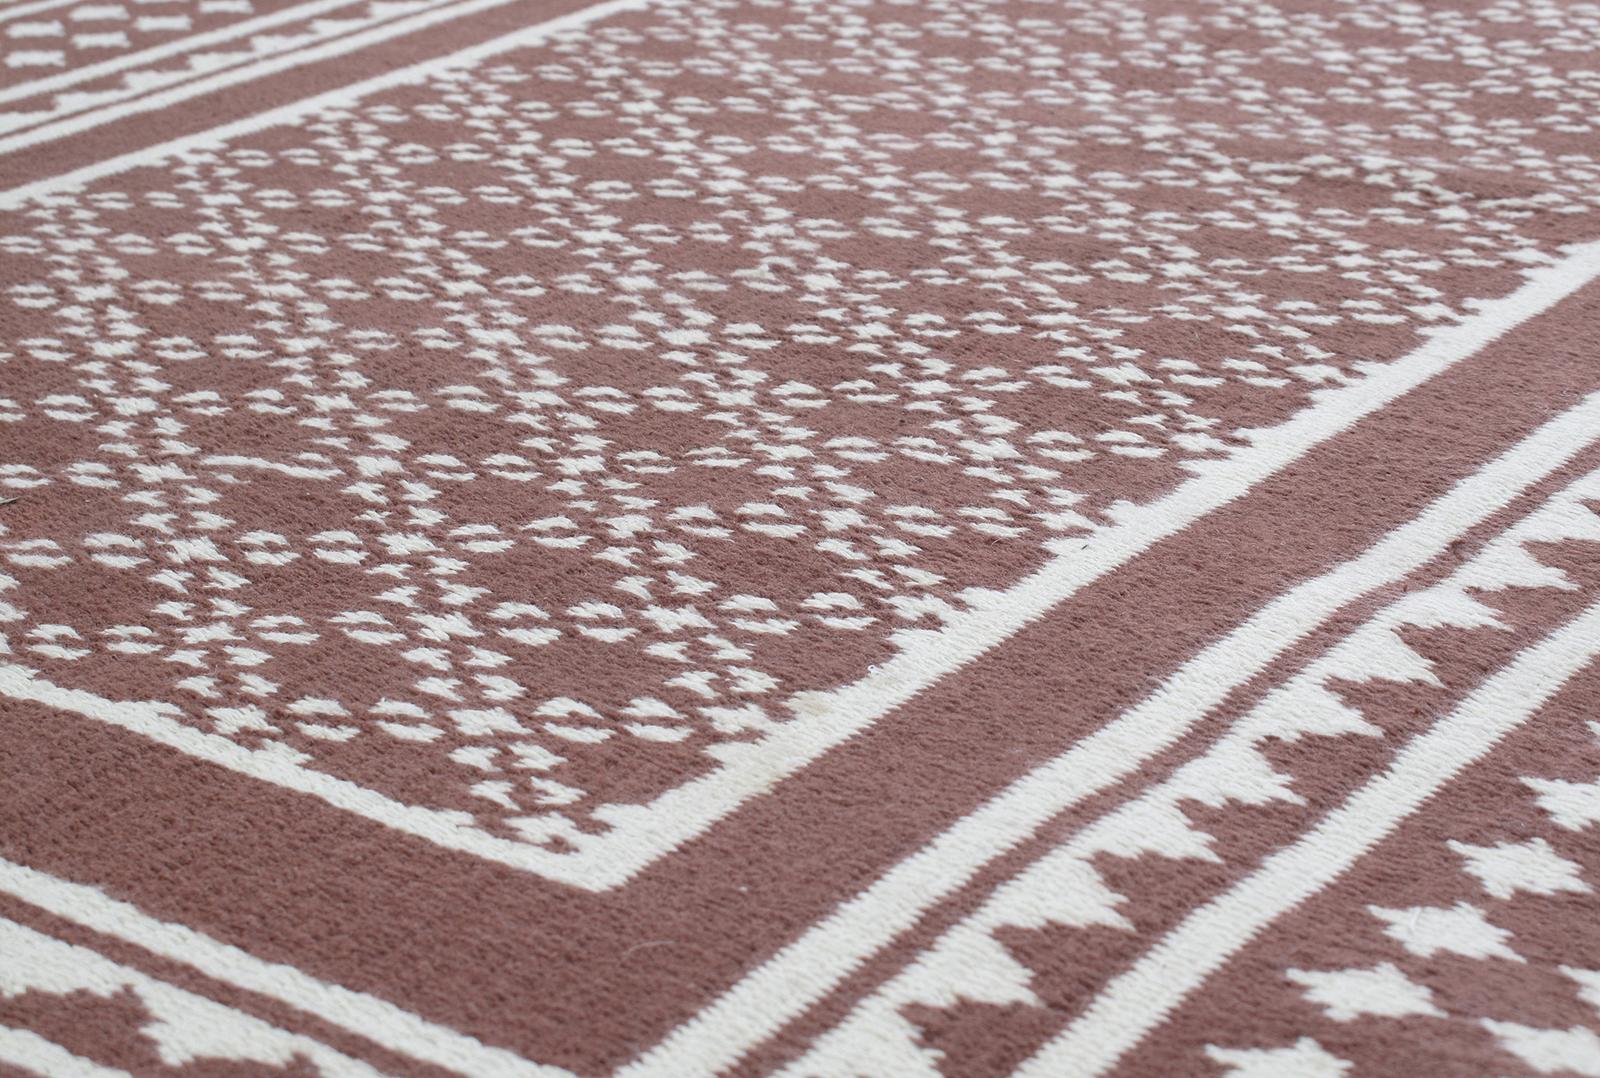 This tribal style flat-weave rug is made with 100% handspun cotton and natural dyes. It is inspired by the antique Zeillu kilims that are native to the Yazd region in Iran. Nasiri continues their rich tradition of rug making by applying the same